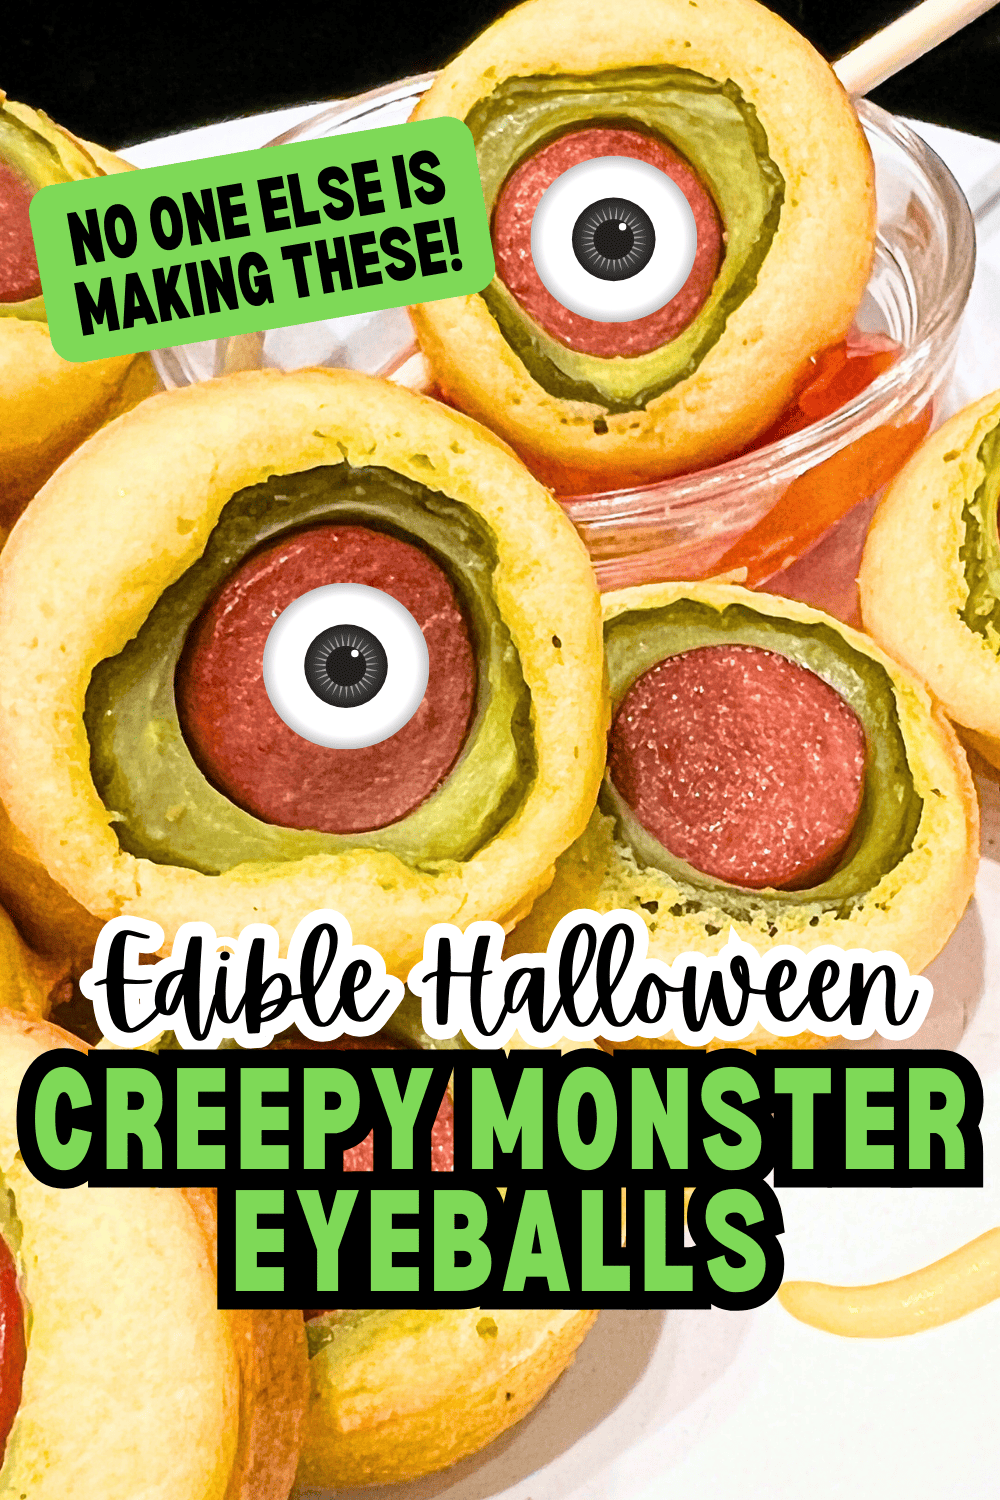 FUN HALLOWEEN RECIPE Monster Spooky Eyeballs - pickle corn dogs with funny eyes